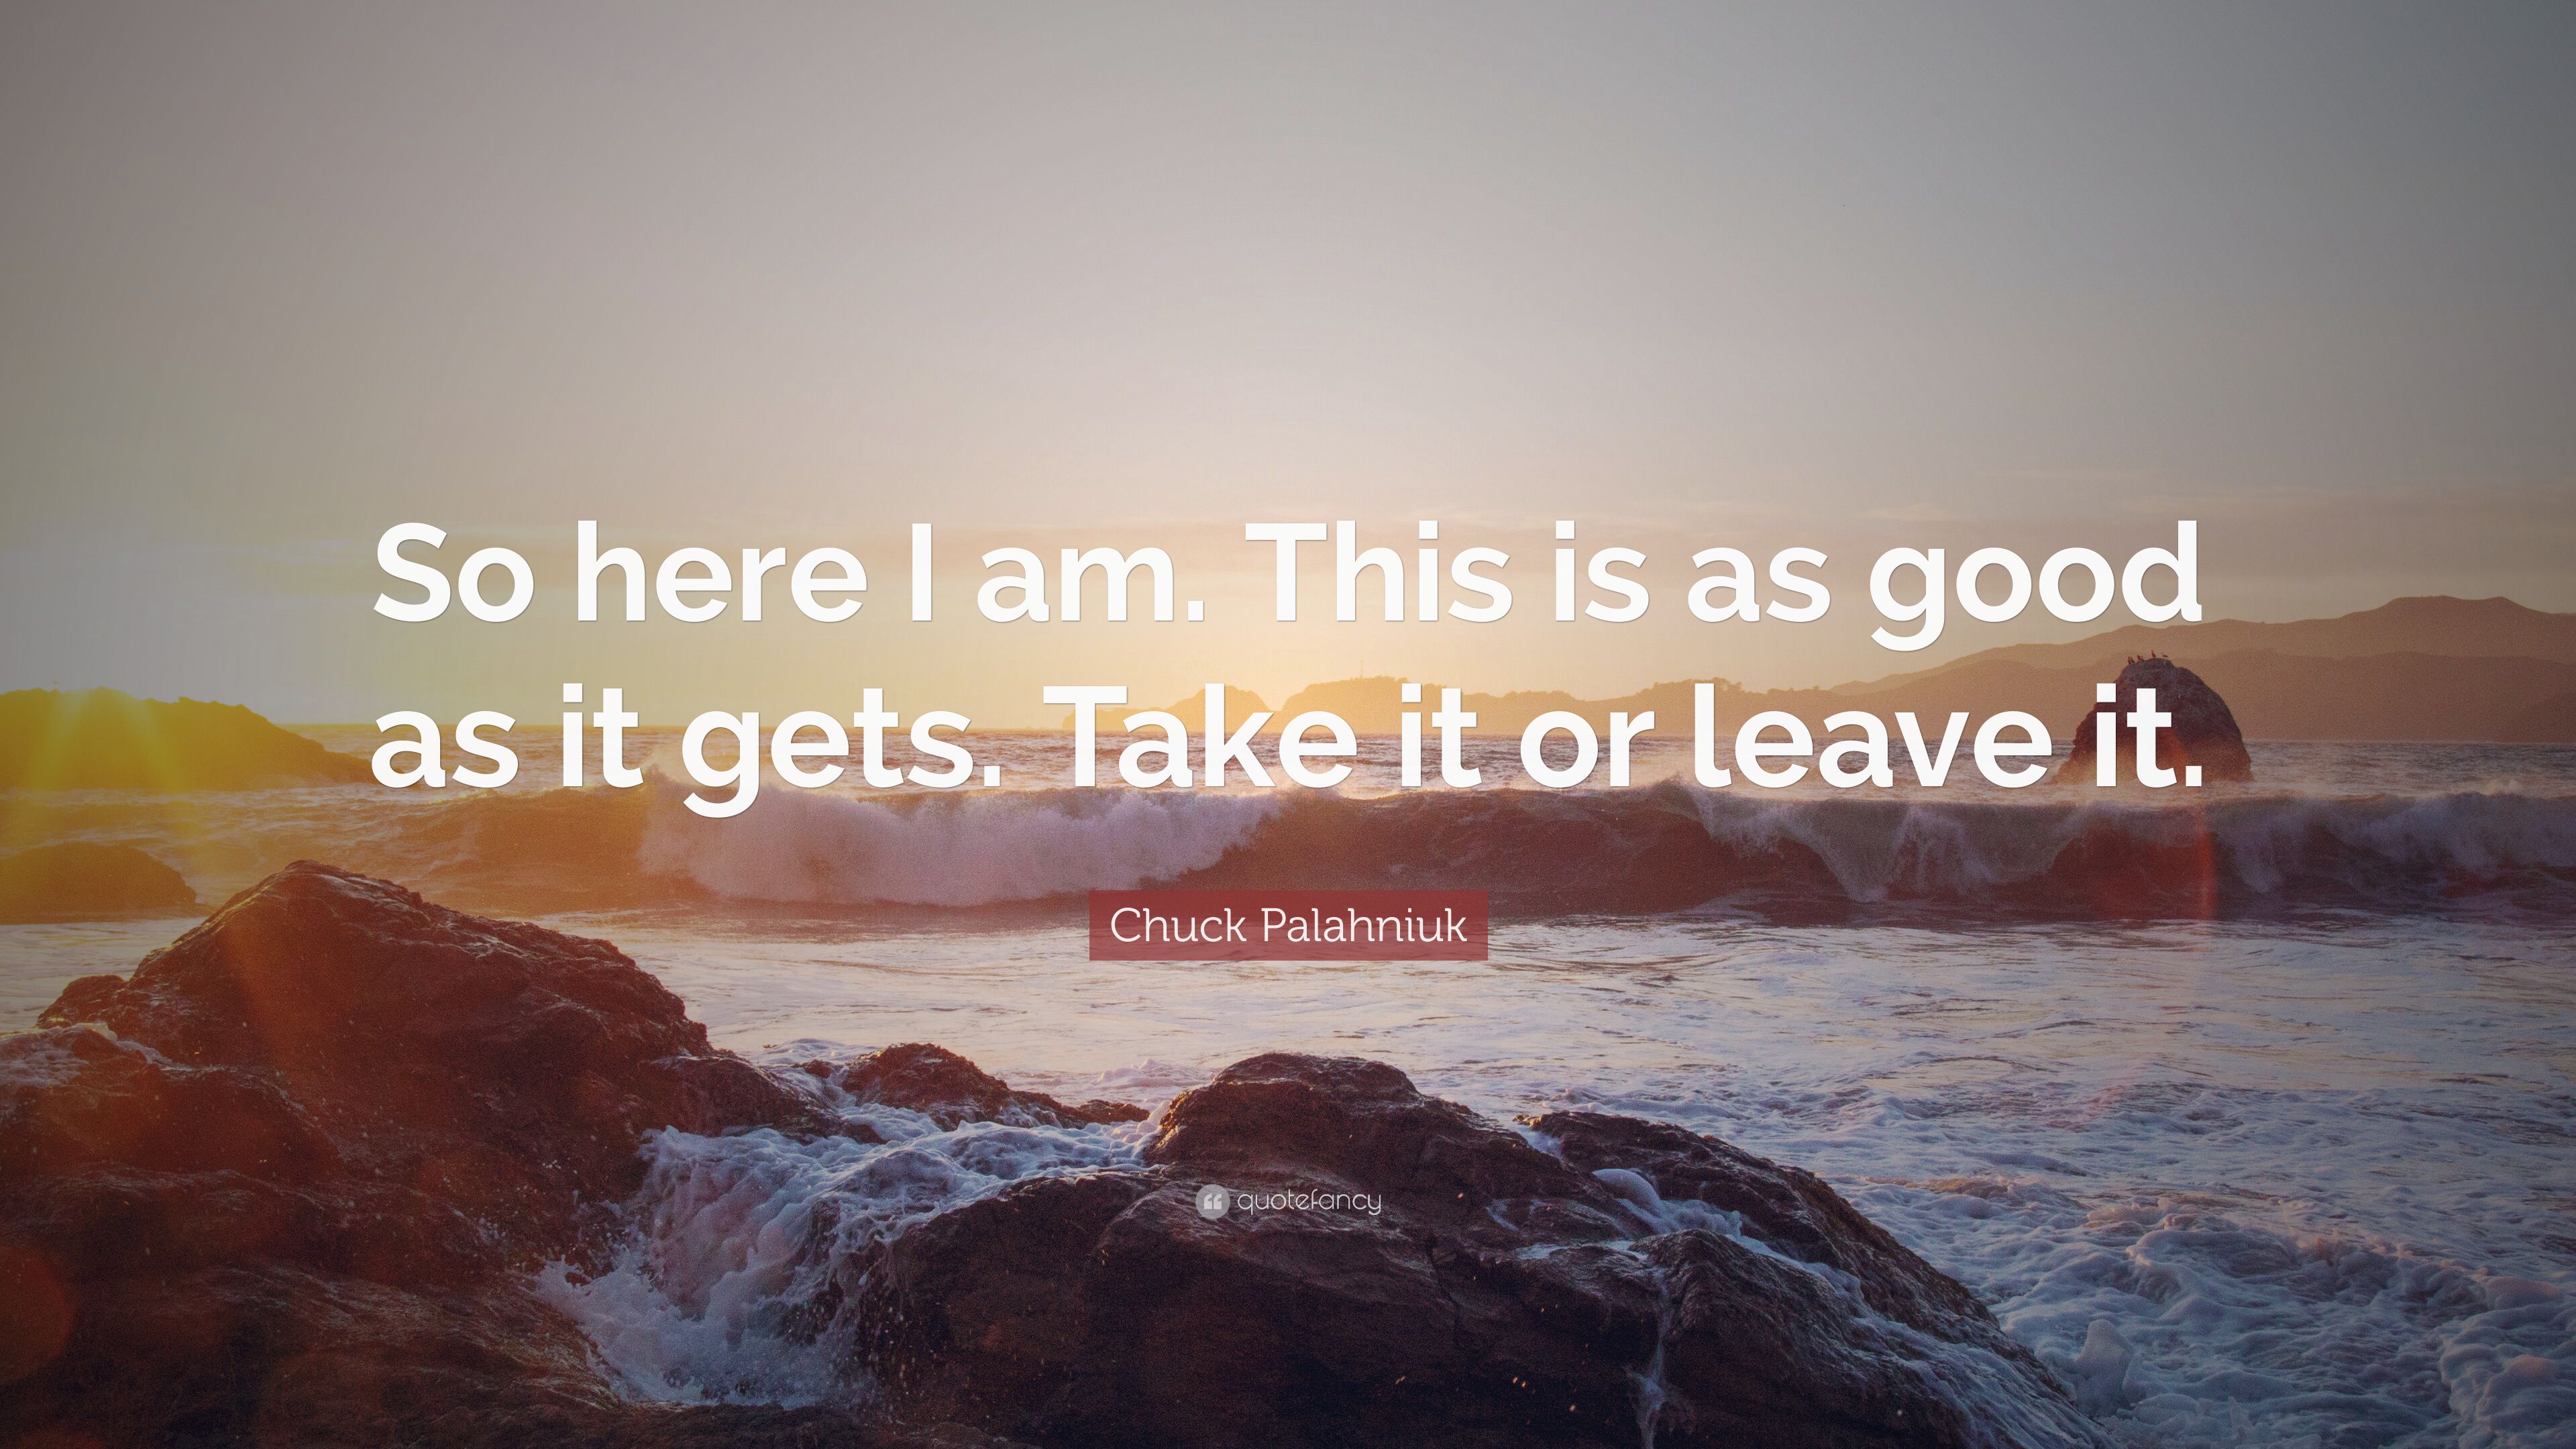 Chuck Palahniuk Quote: “So here I am. This is as good as it gets